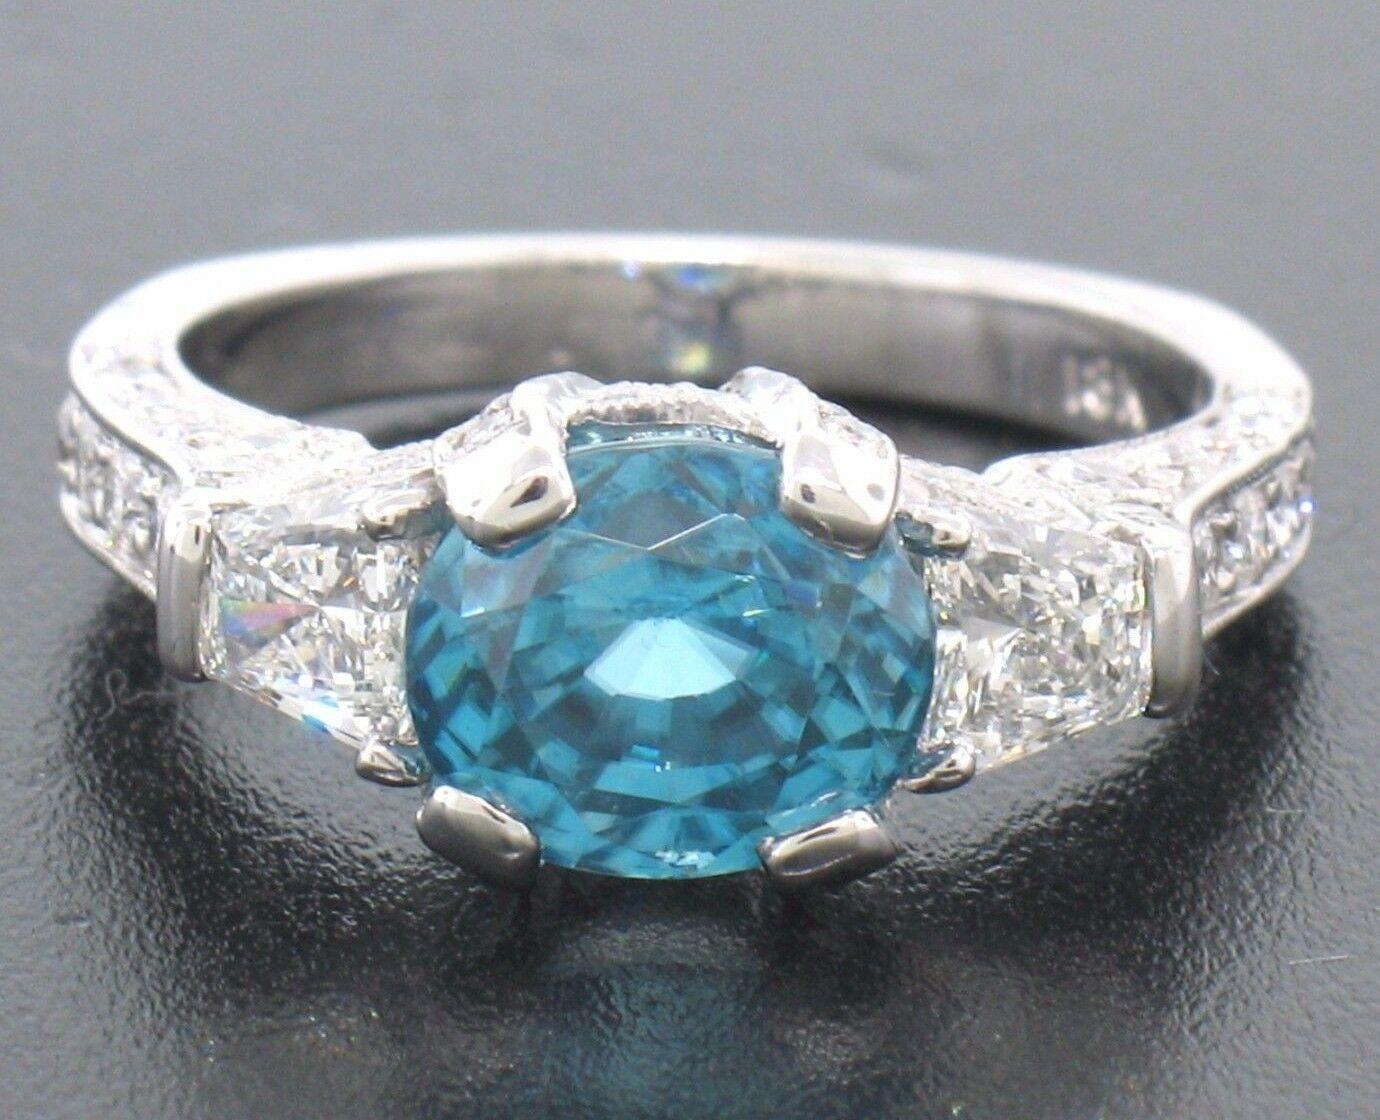 A natural blue zircon with this color at this size is very hard to find. When you add it to a mesmerizing 18k white gold mounting covered in top quality diamonds and accented by trapezoid cut stones, you have yourself a ring fit only for a very